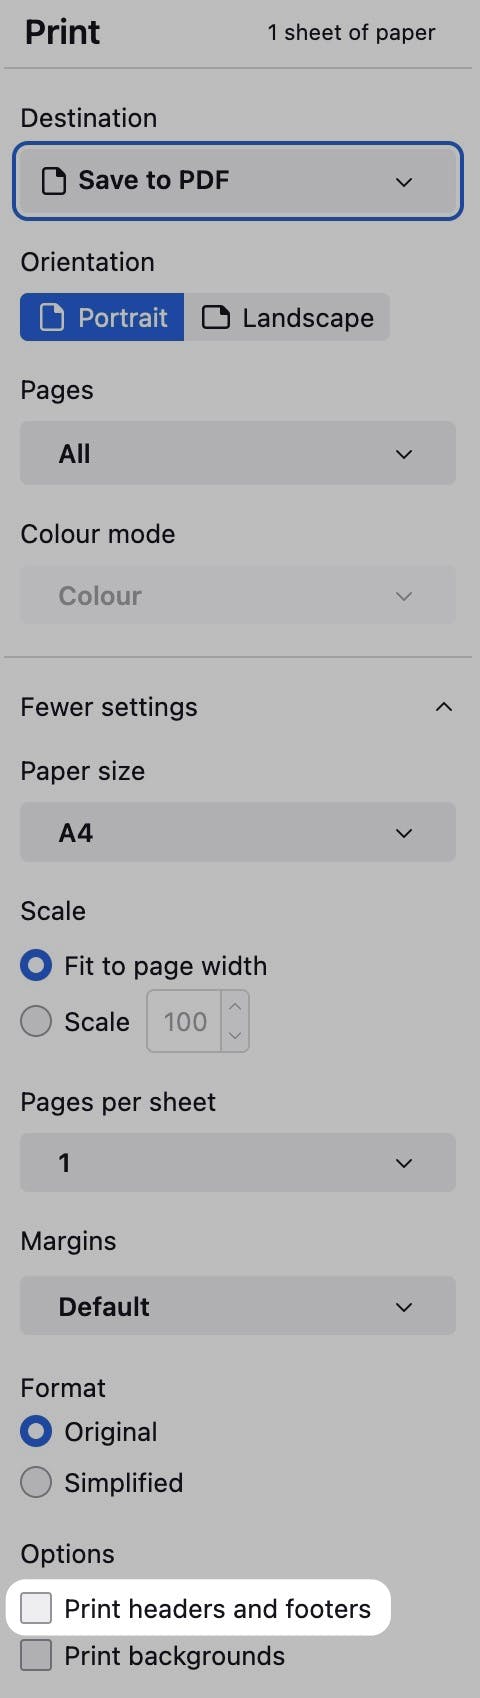 Removing headers/footers from prints